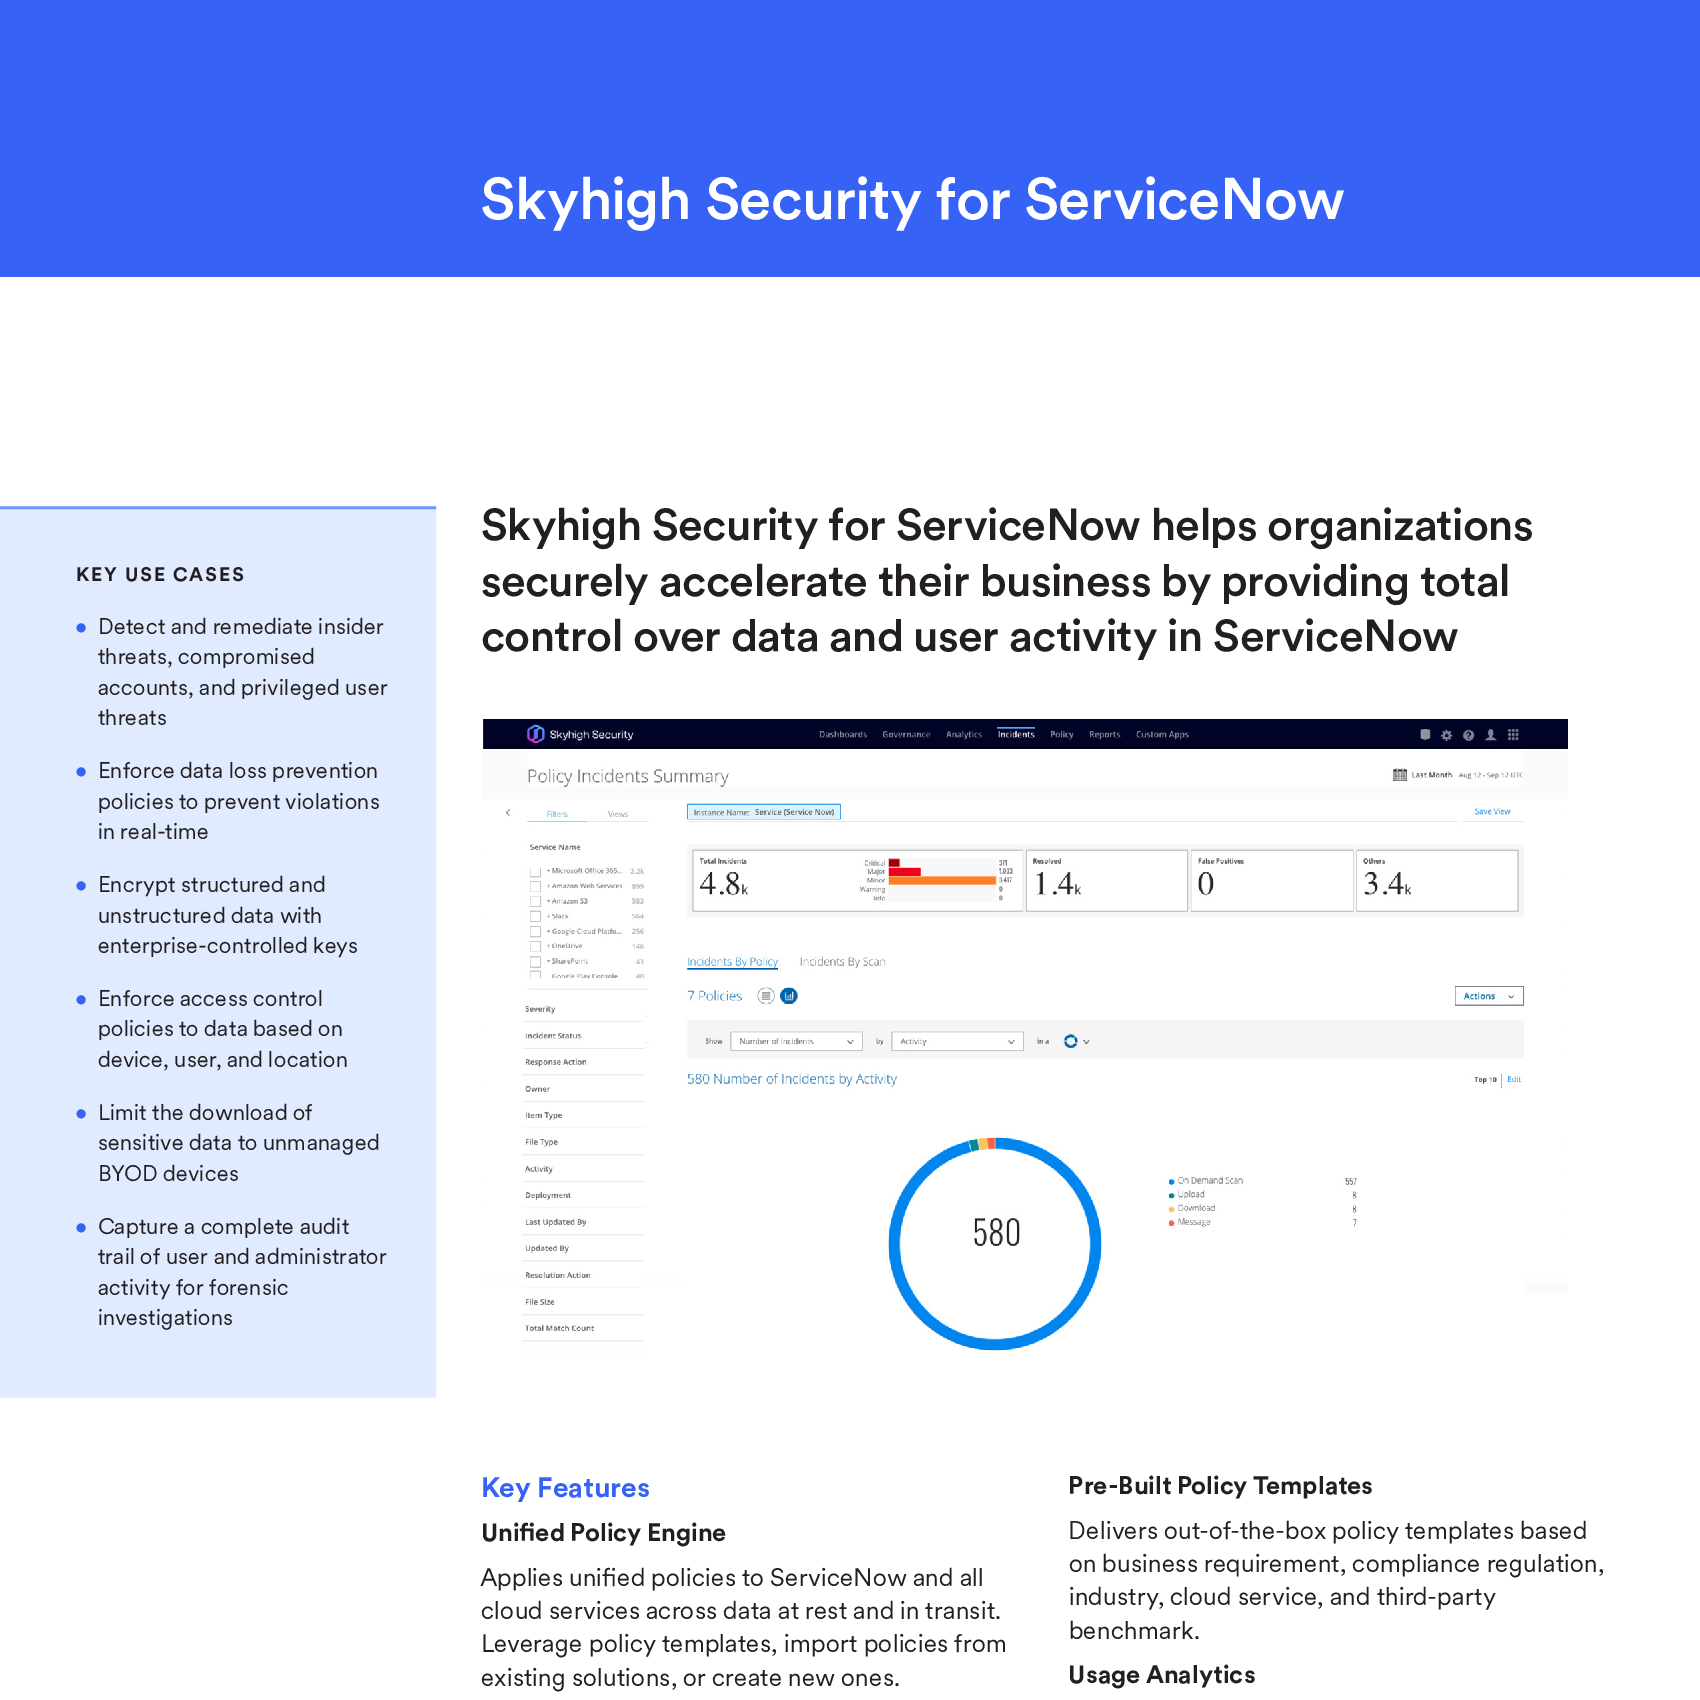 Skyhigh Security for Service Now